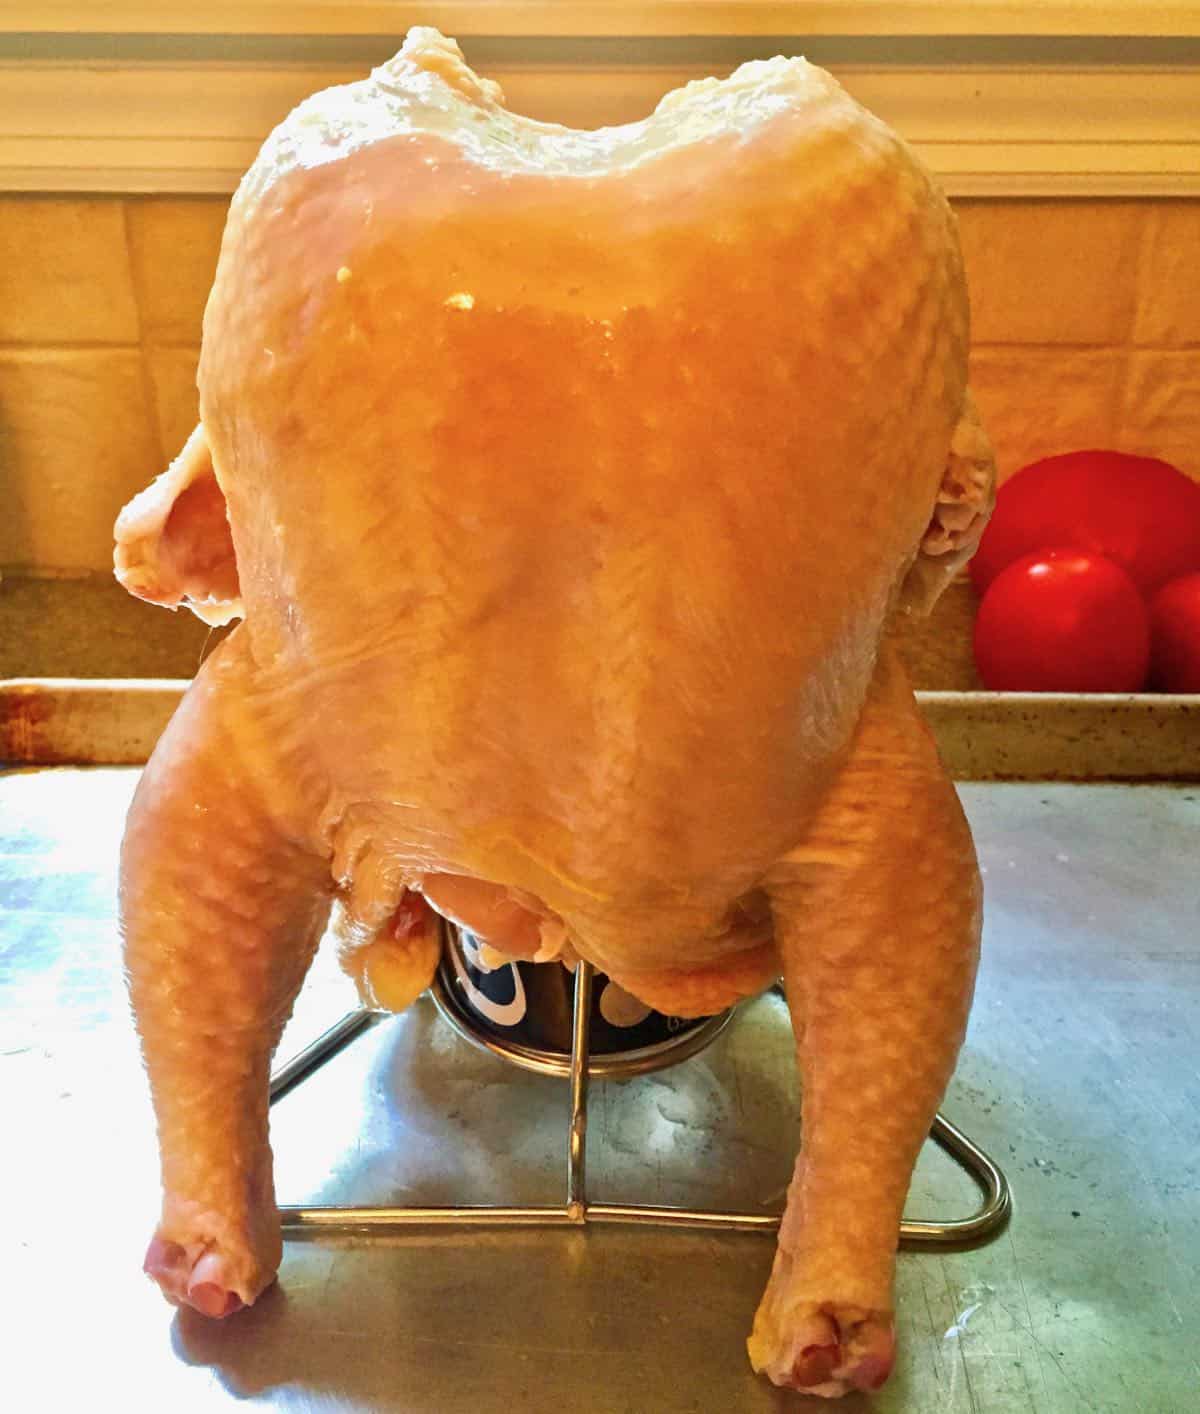 A whole chicken sitting upright on a beer can.